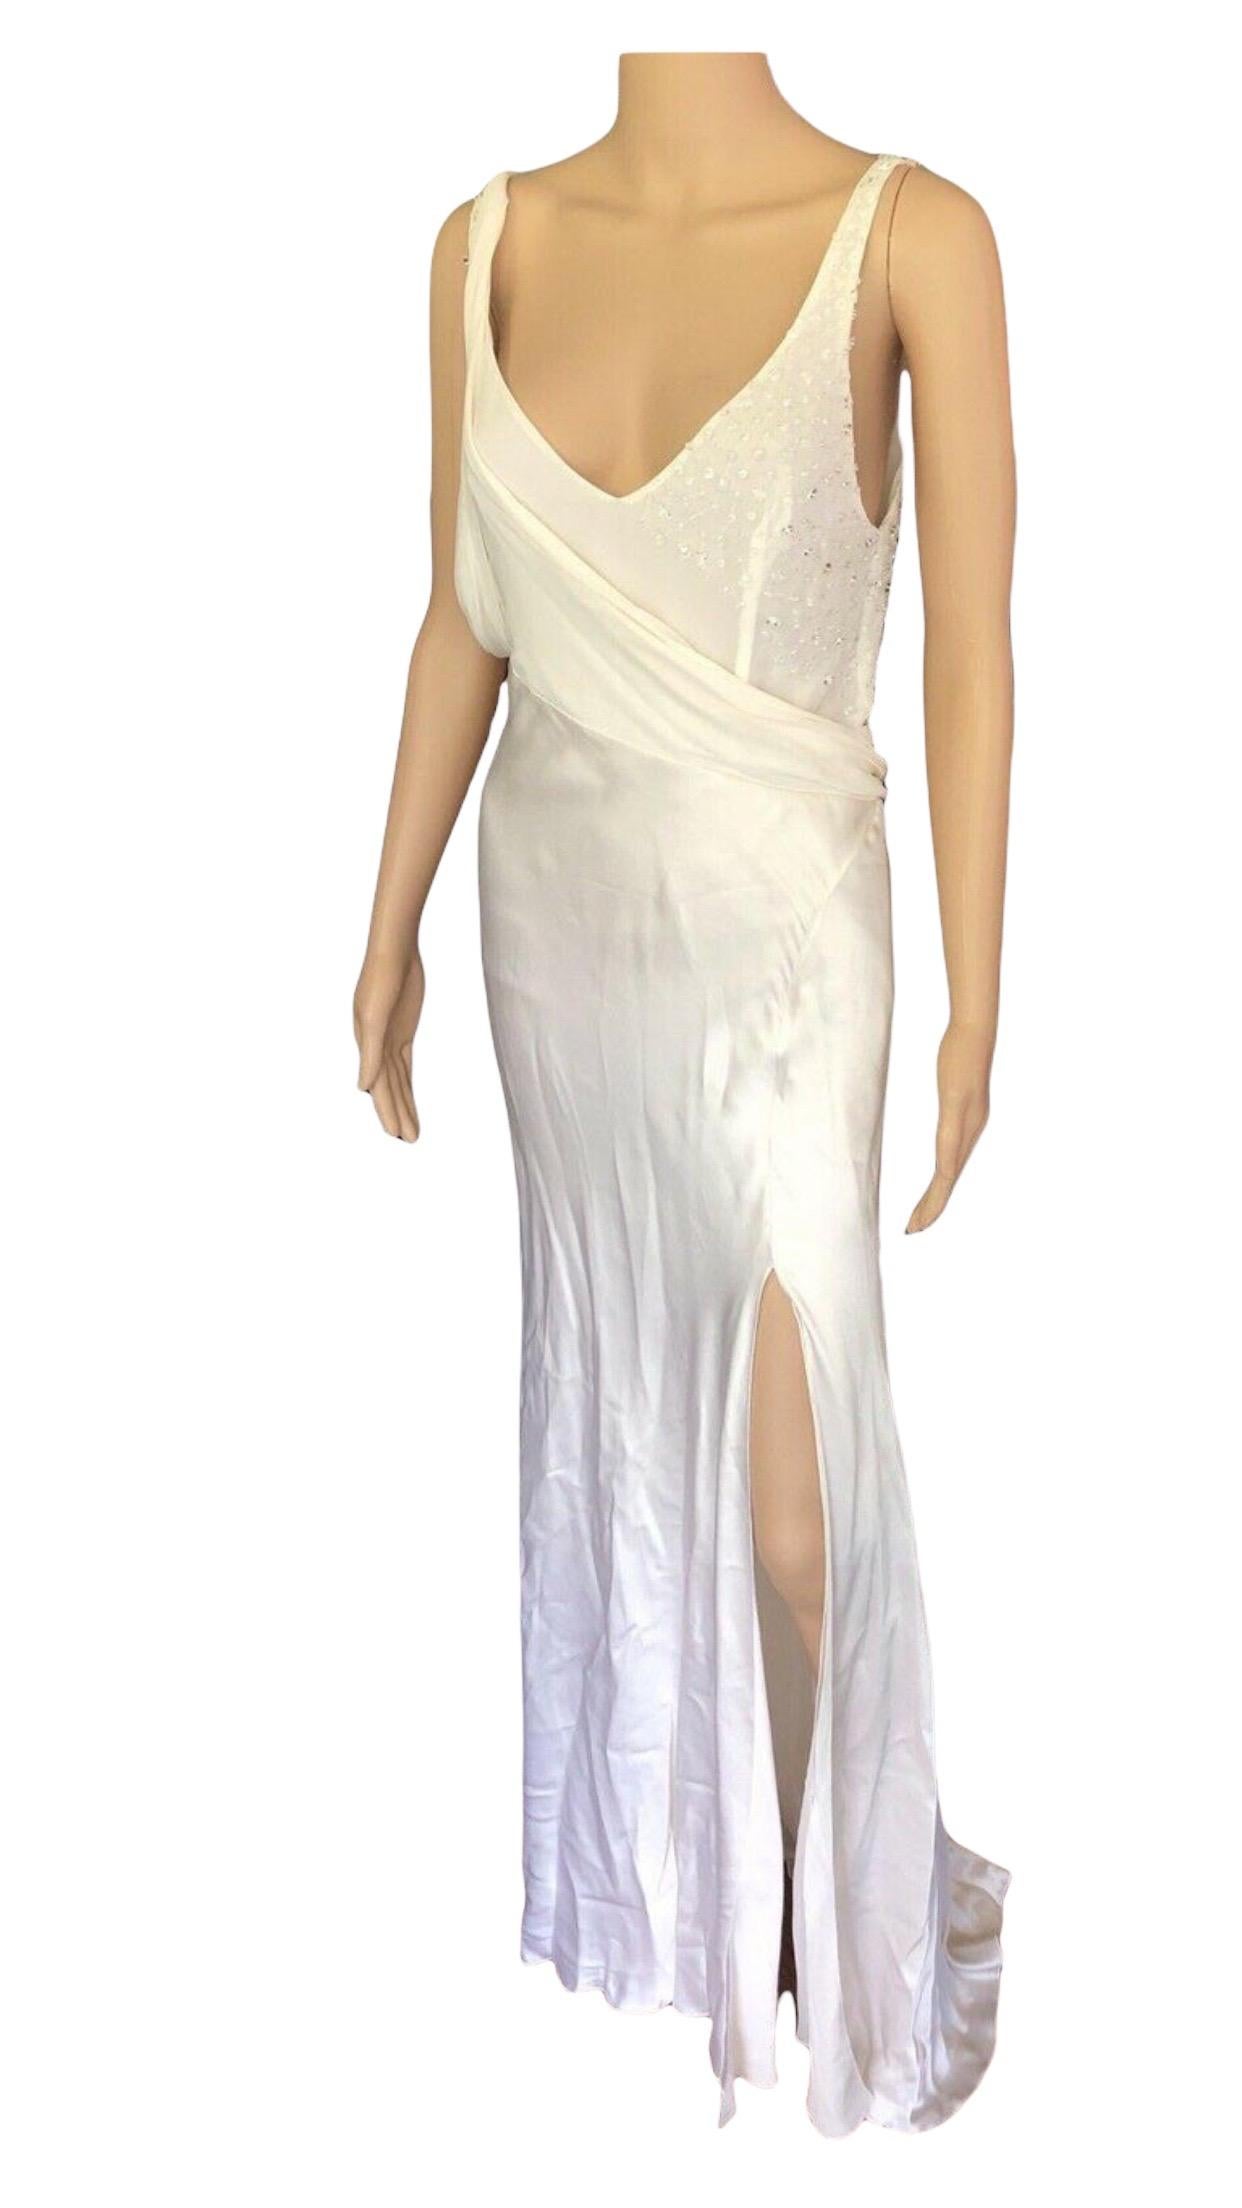 Versace S/S 2005 Embellished Cutout Back Ivory Dress Gown 1